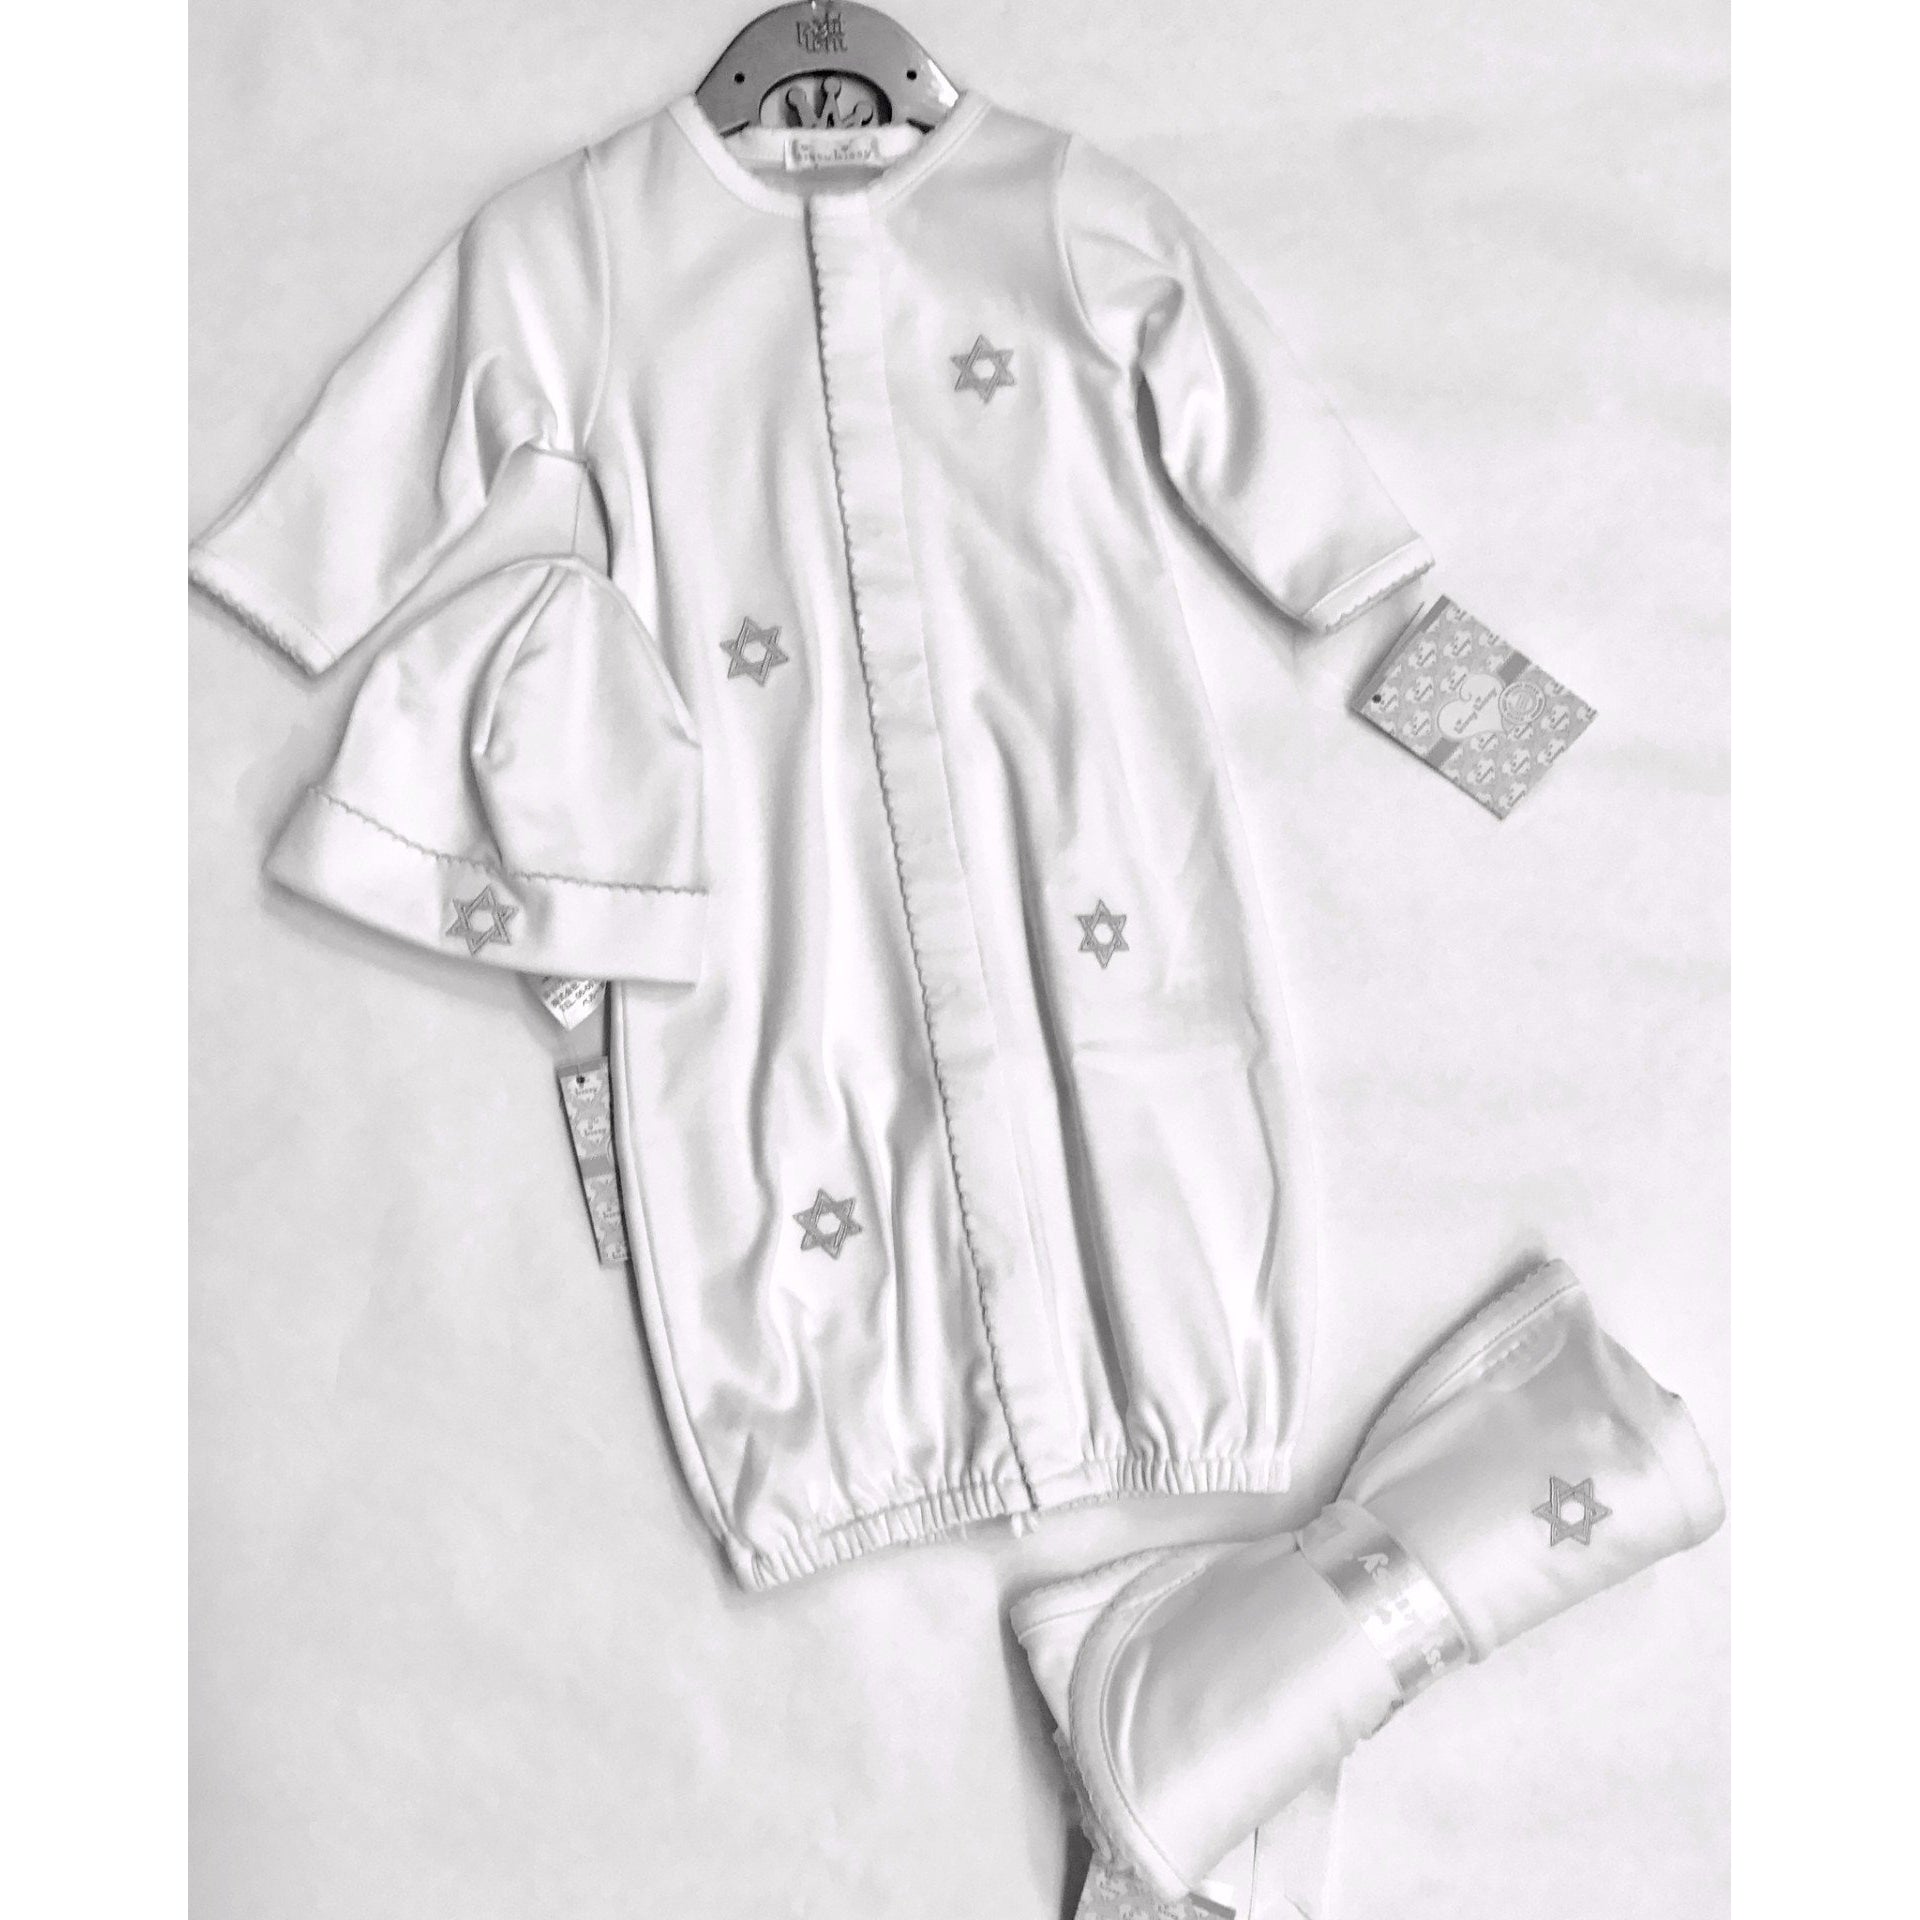 Royal Christening Gown - Little Things Mean a Lot